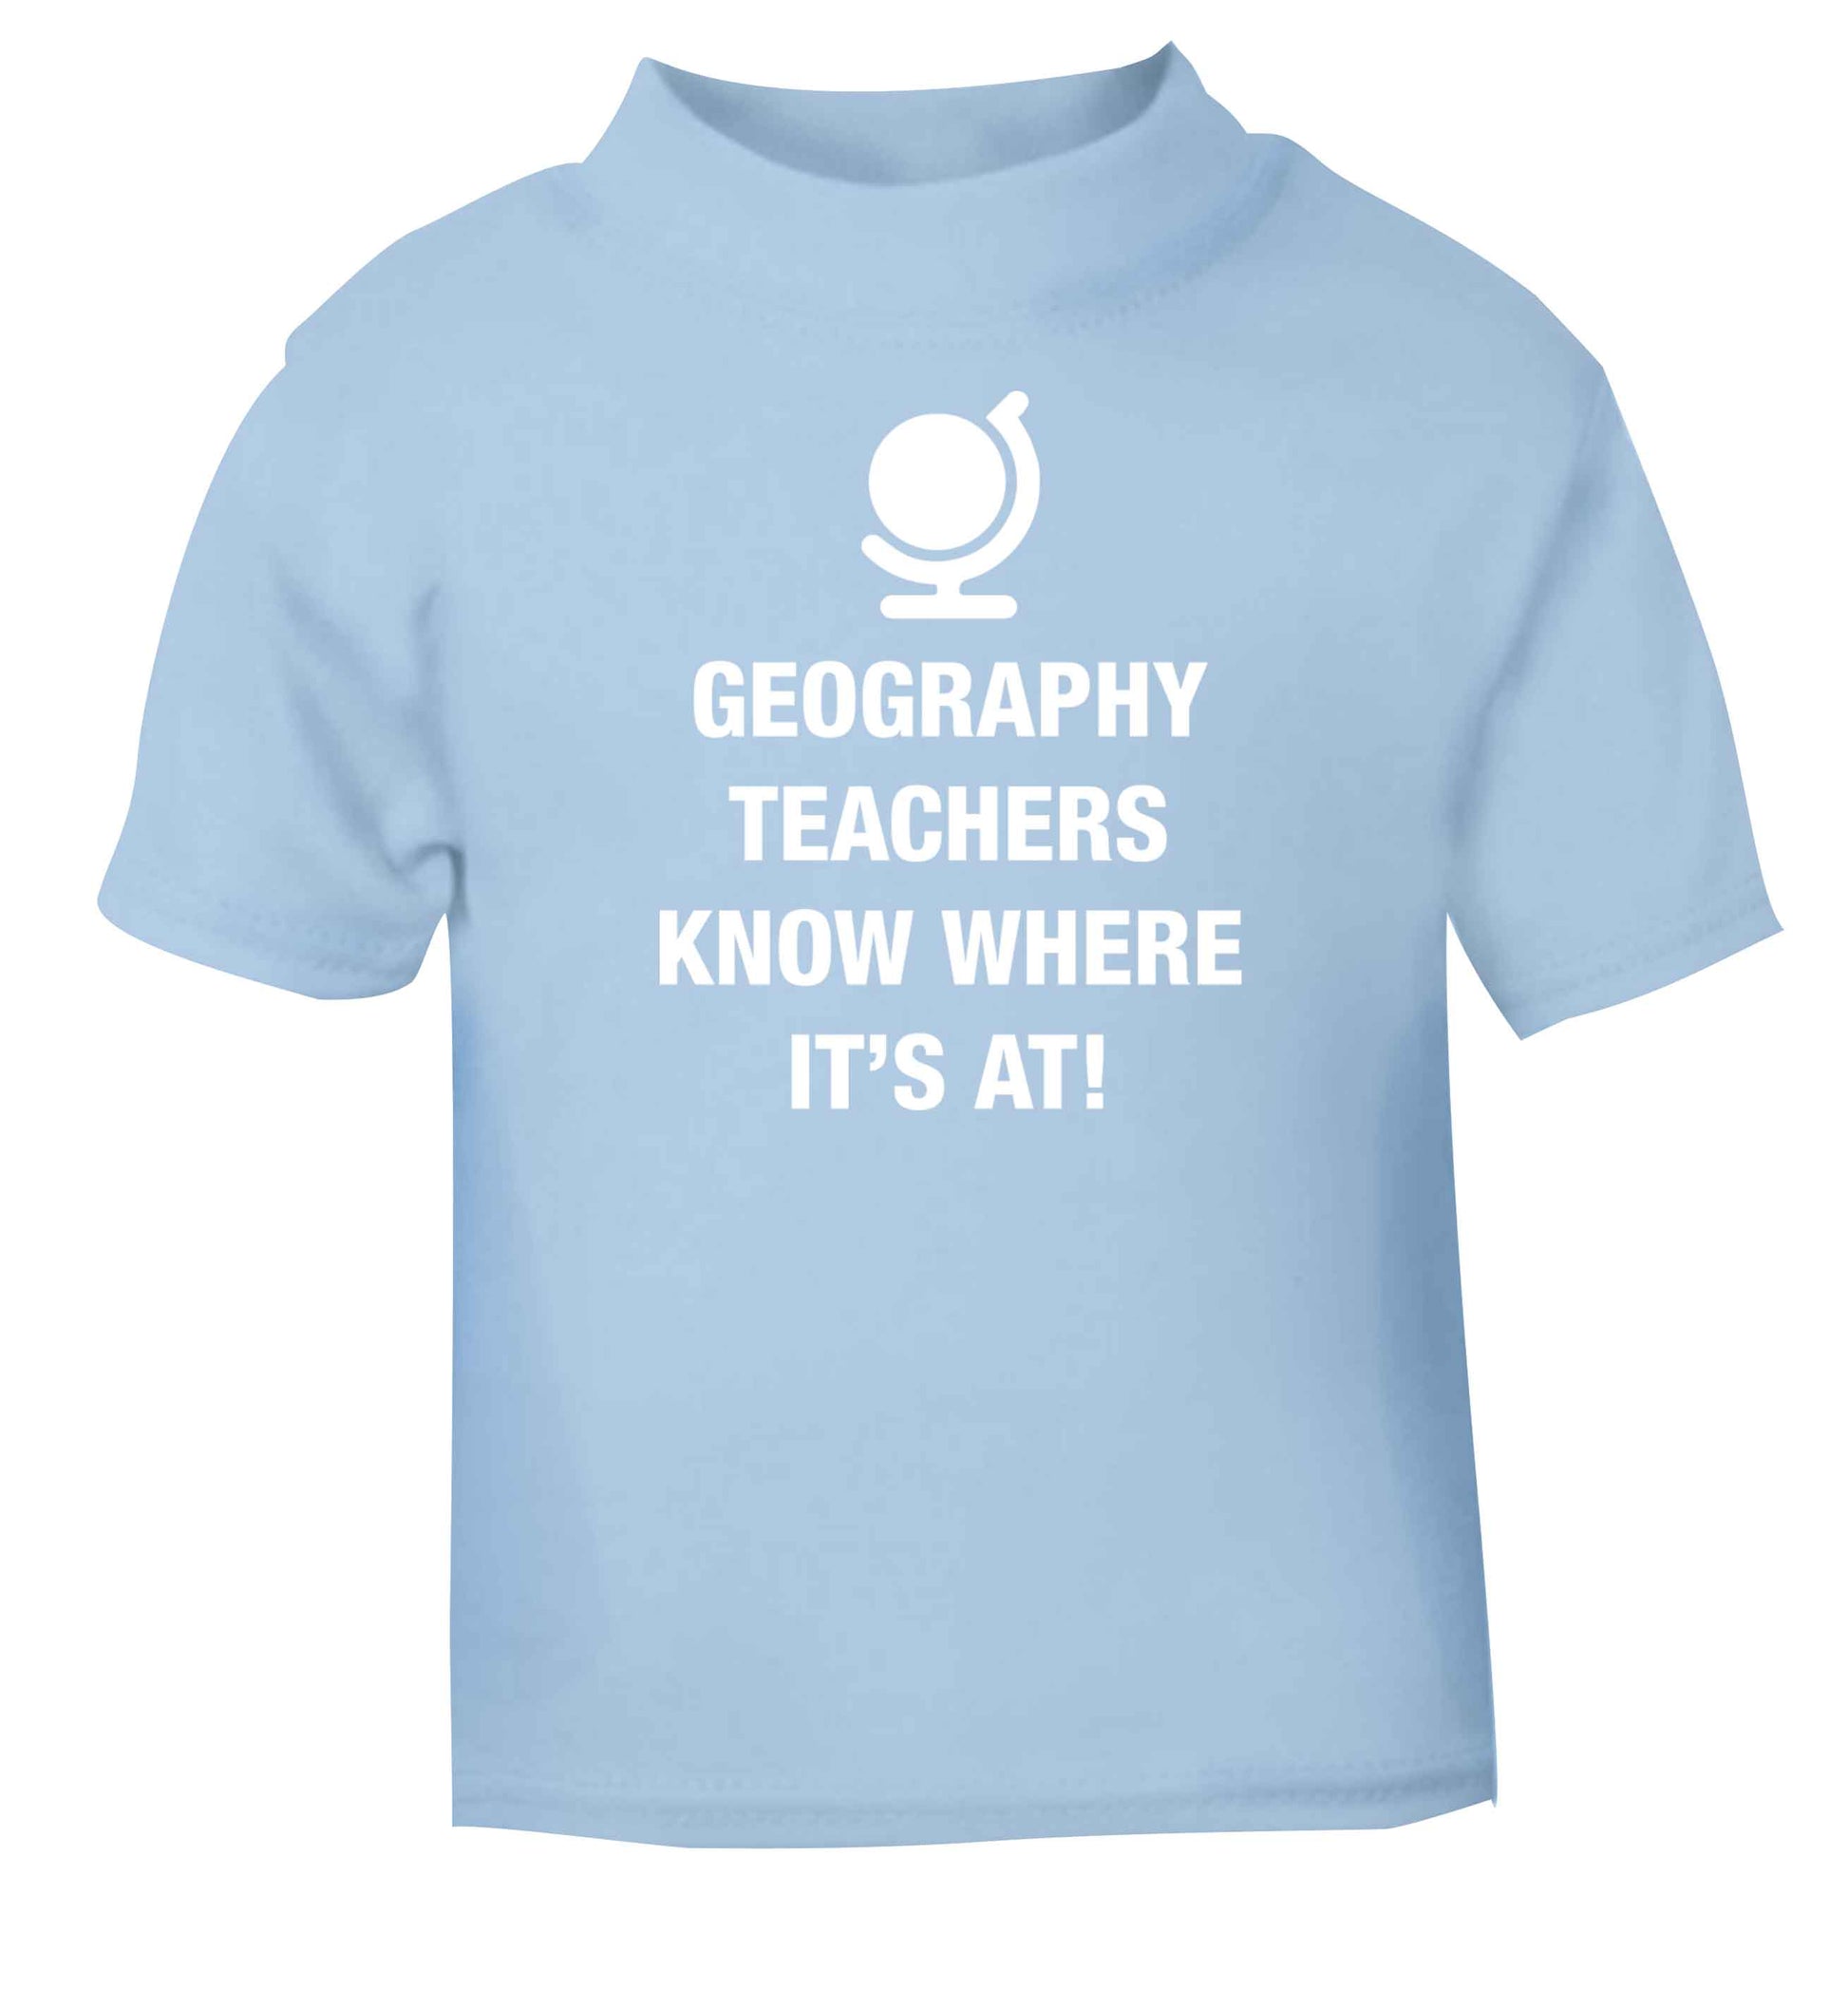 Geography teachers know where it's at light blue baby toddler Tshirt 2 Years